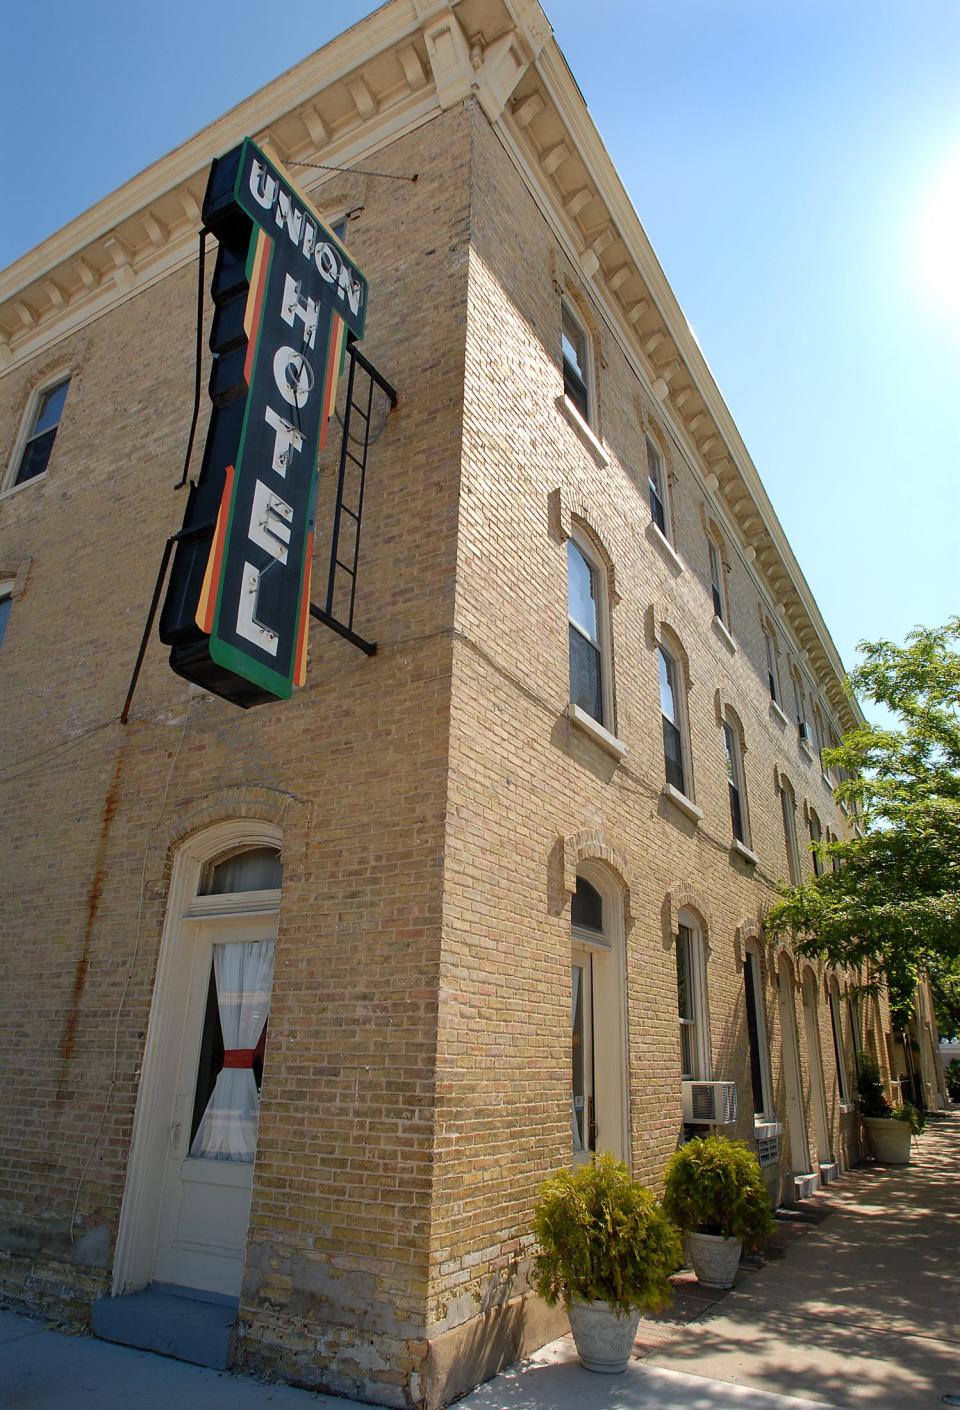 The historic Union Hotel & Restaurant in De Pere will be one of the primary sites for filming of a new TV series by local filmmaker Freddy Moyano.